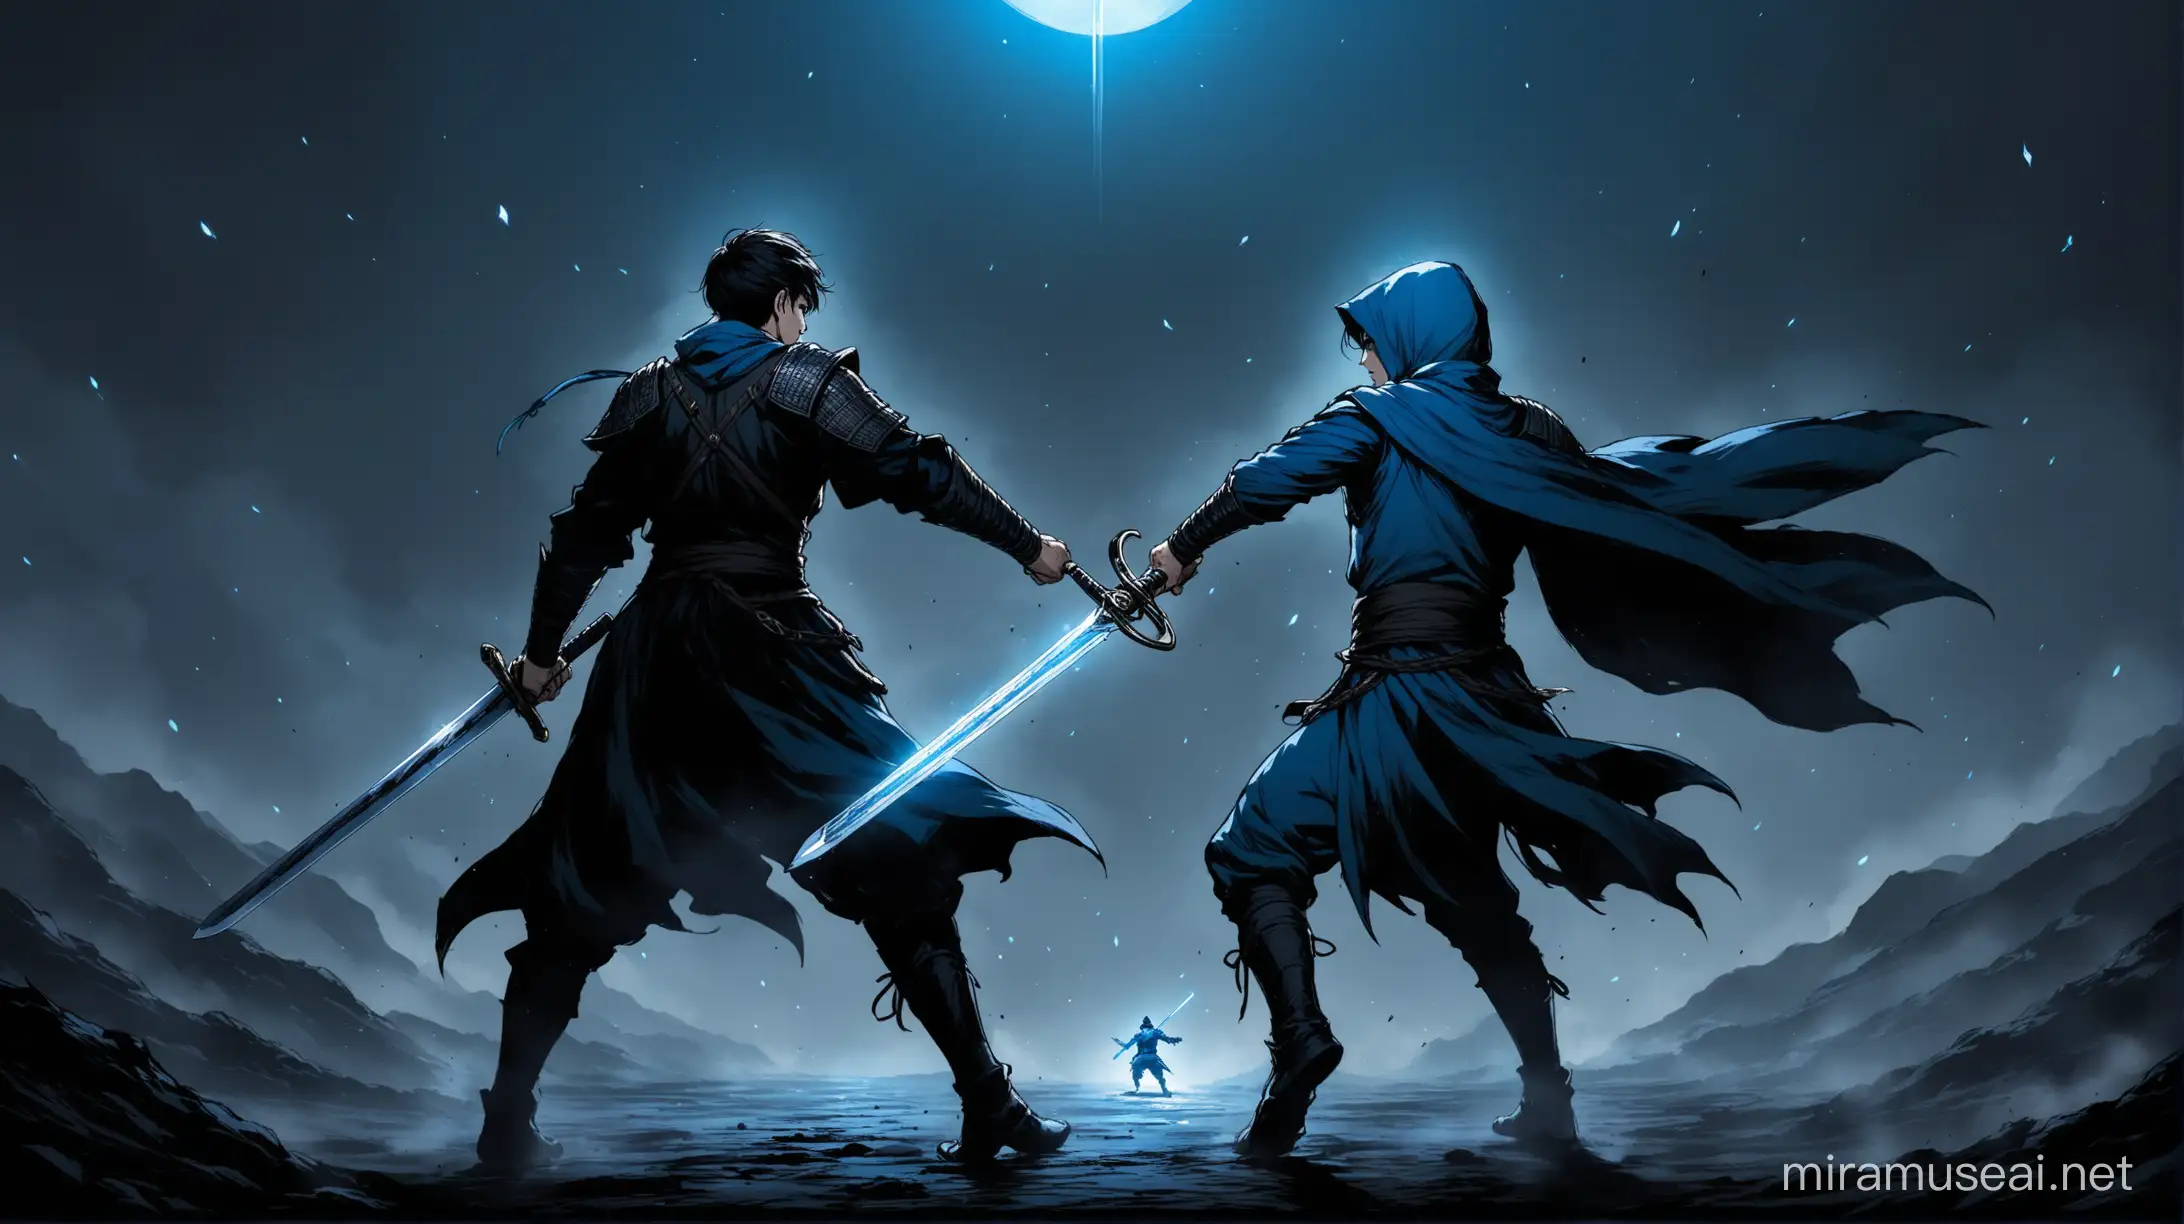 The young warrior dressed in blue leaped with his sword towards the man dressed in pitch black.